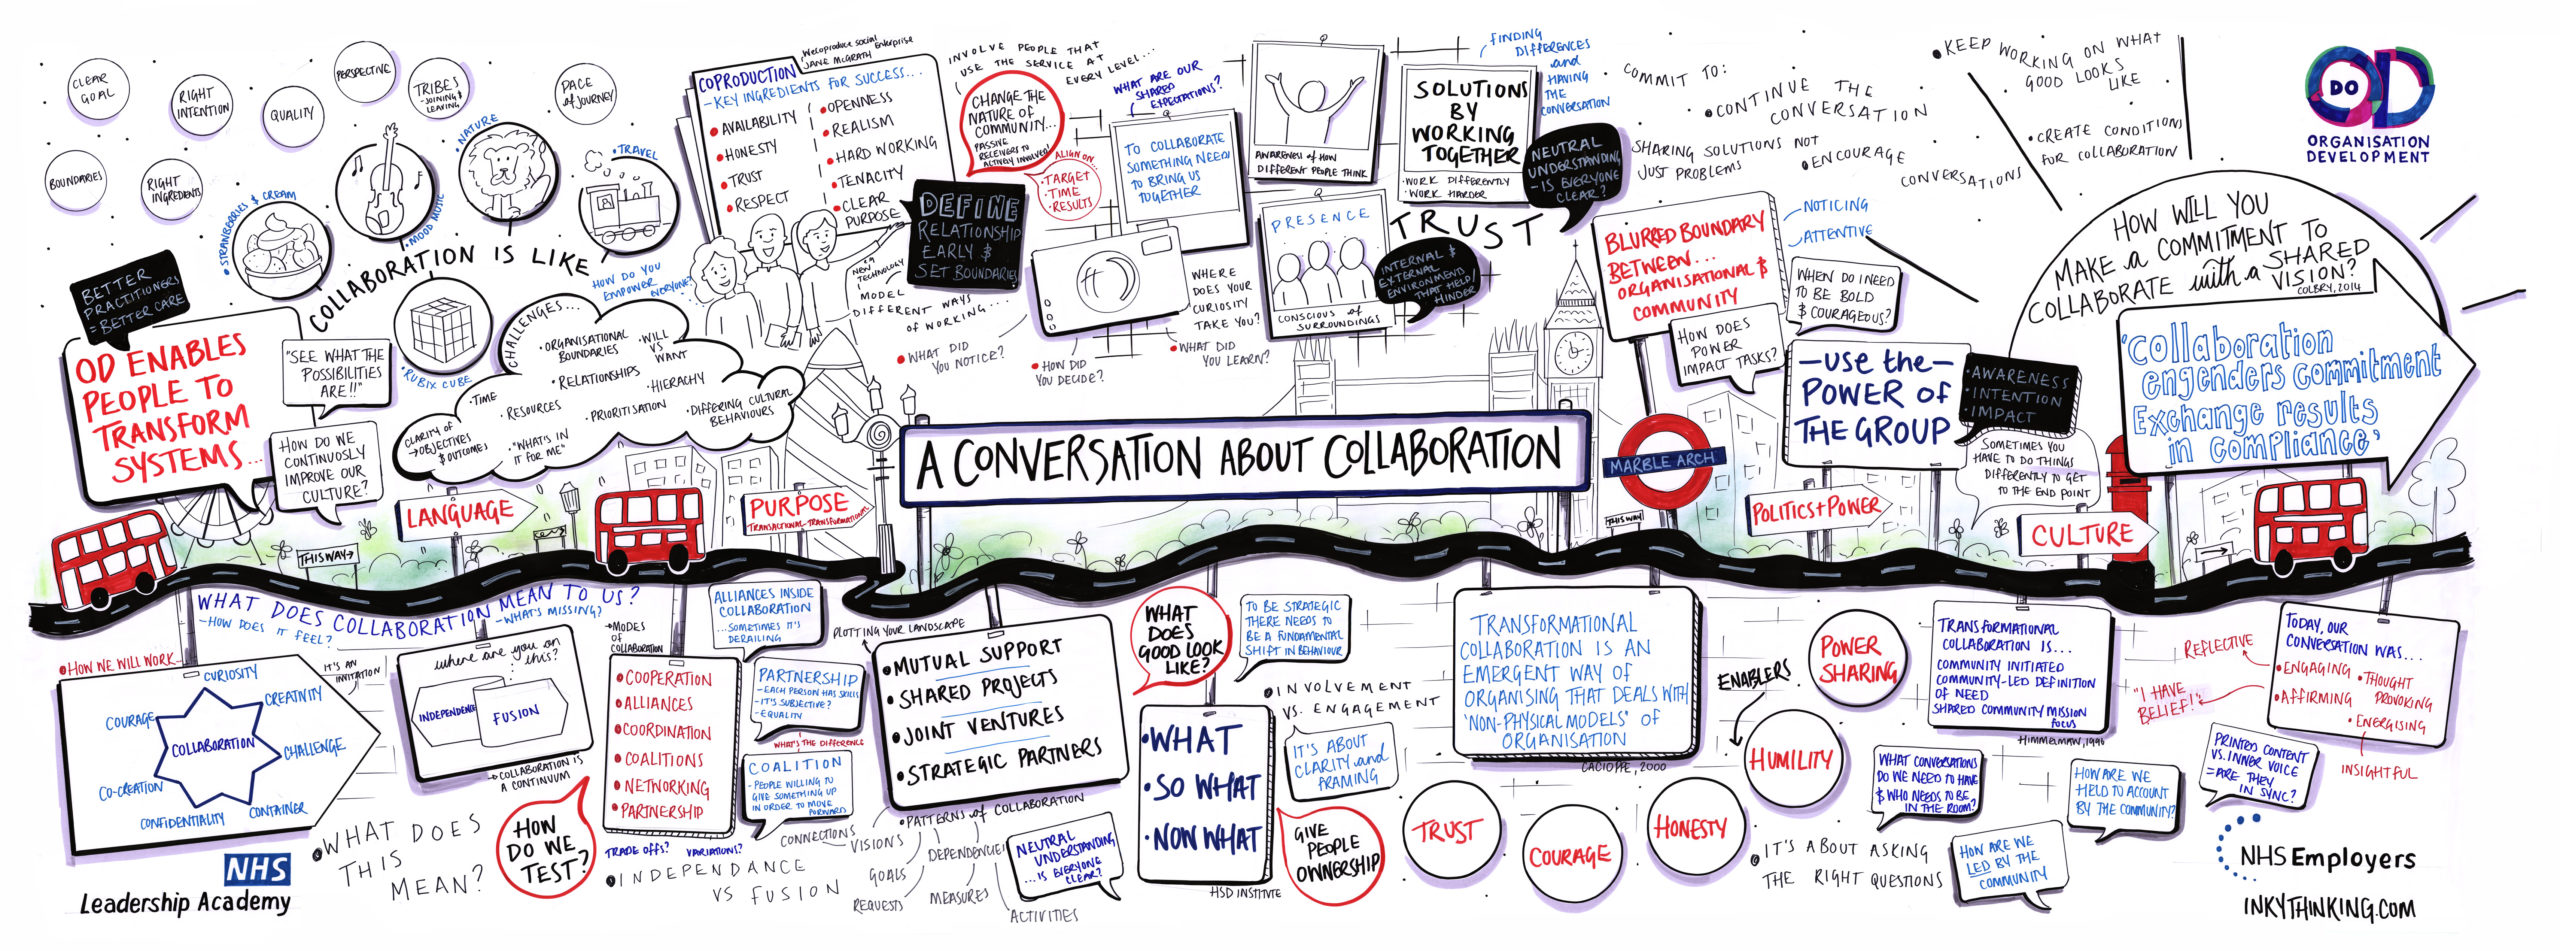 NHS Do OD Conversation about Collaboration